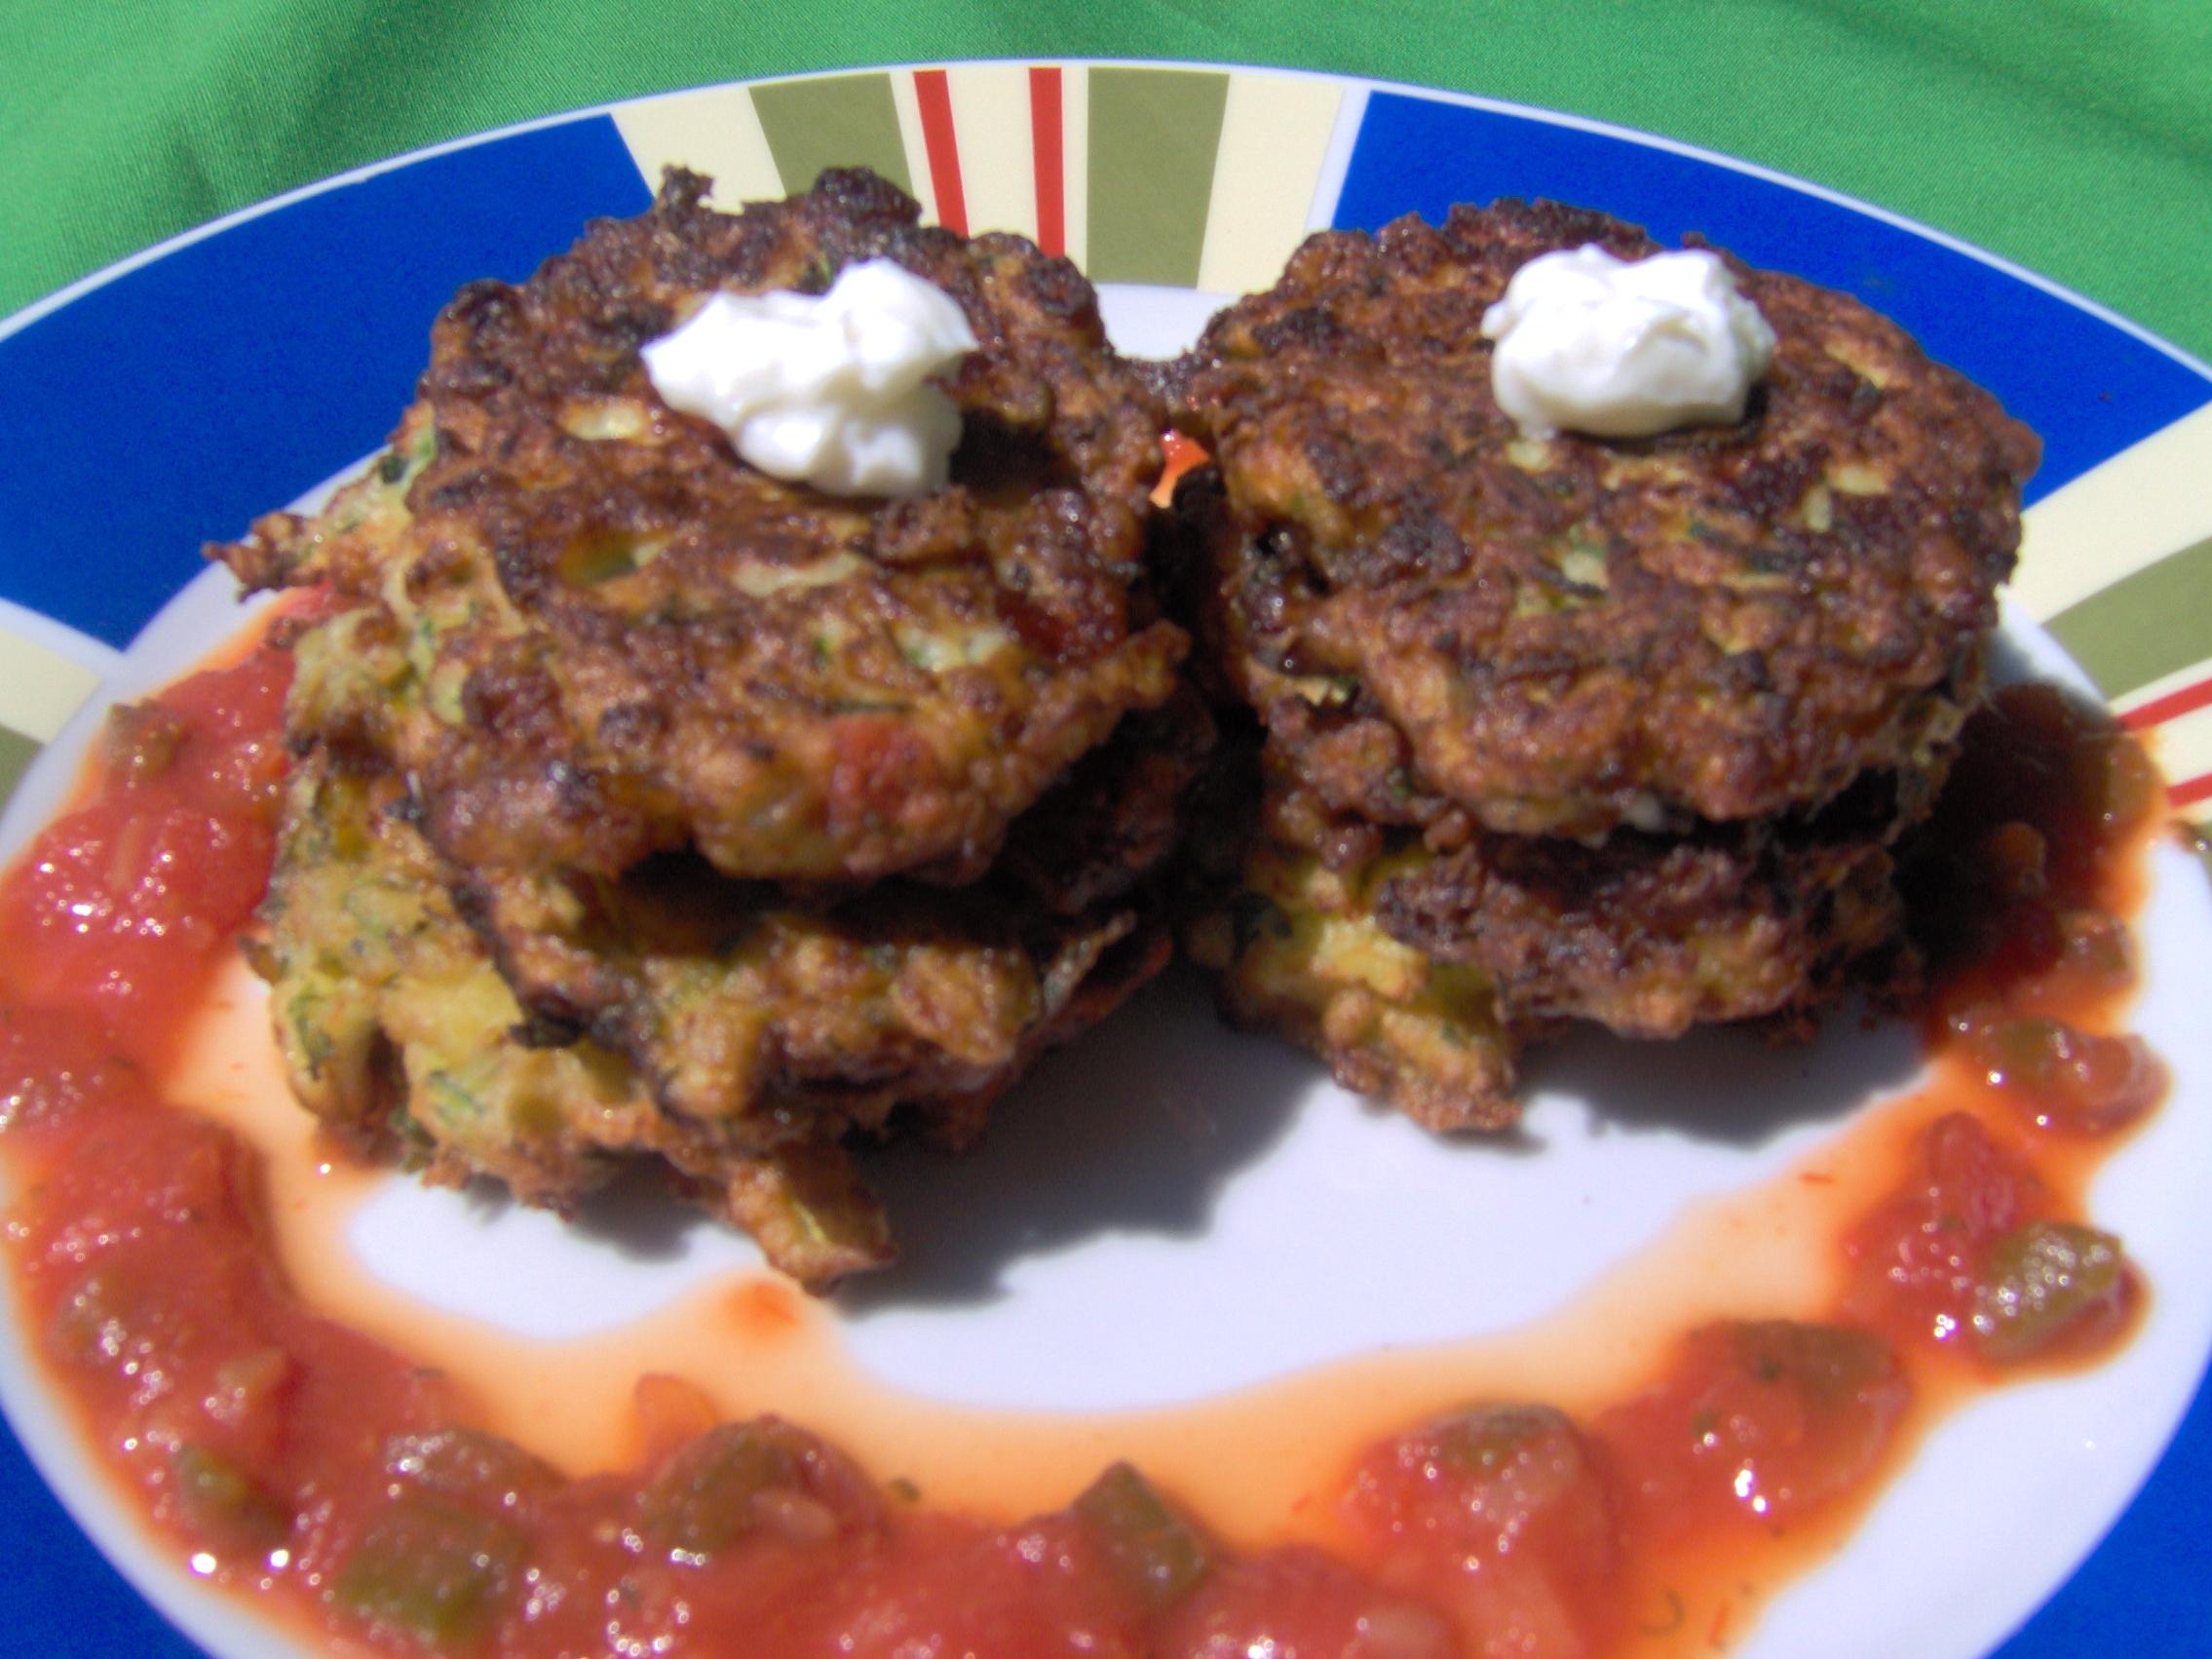  These fritters will win over even the pickiest eaters